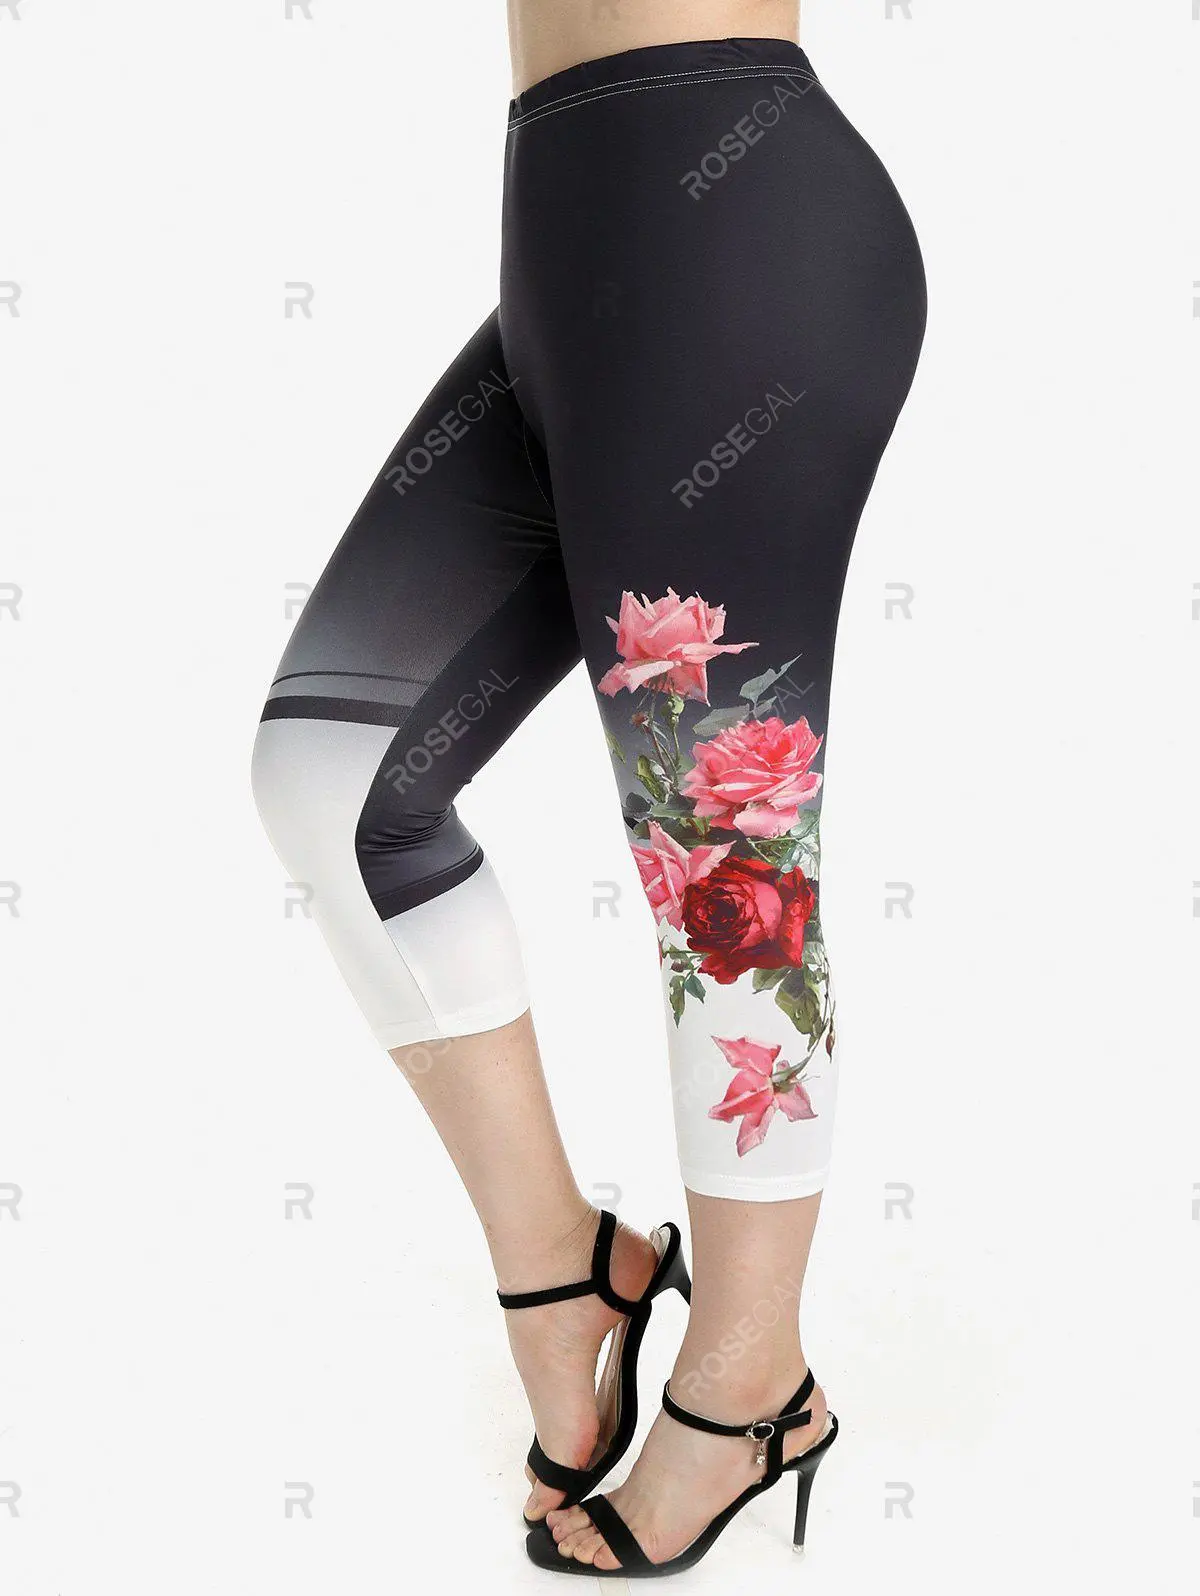 Rose Print Colorblock T-shirt and High Waist Rose Print Colorblock Capri Leggings Plus Size Summer Outfit